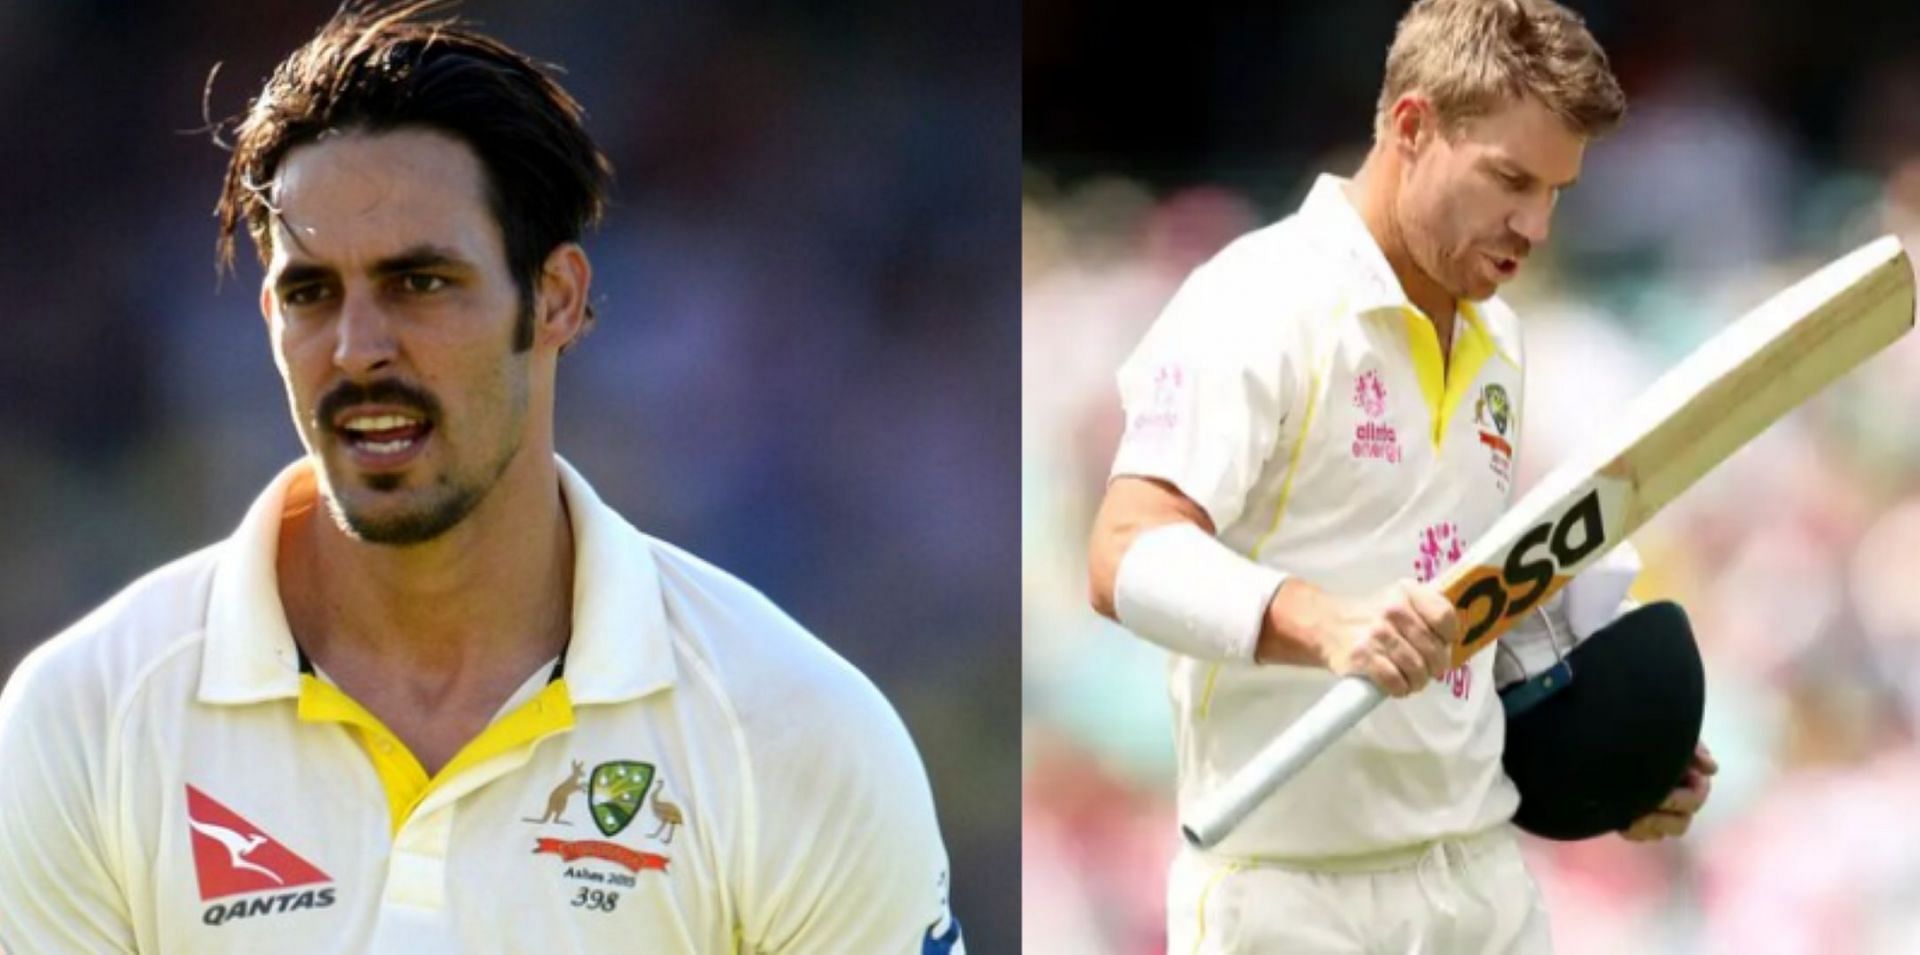 The Mitchell Johnson-David Warner row has made headlines throughout the week